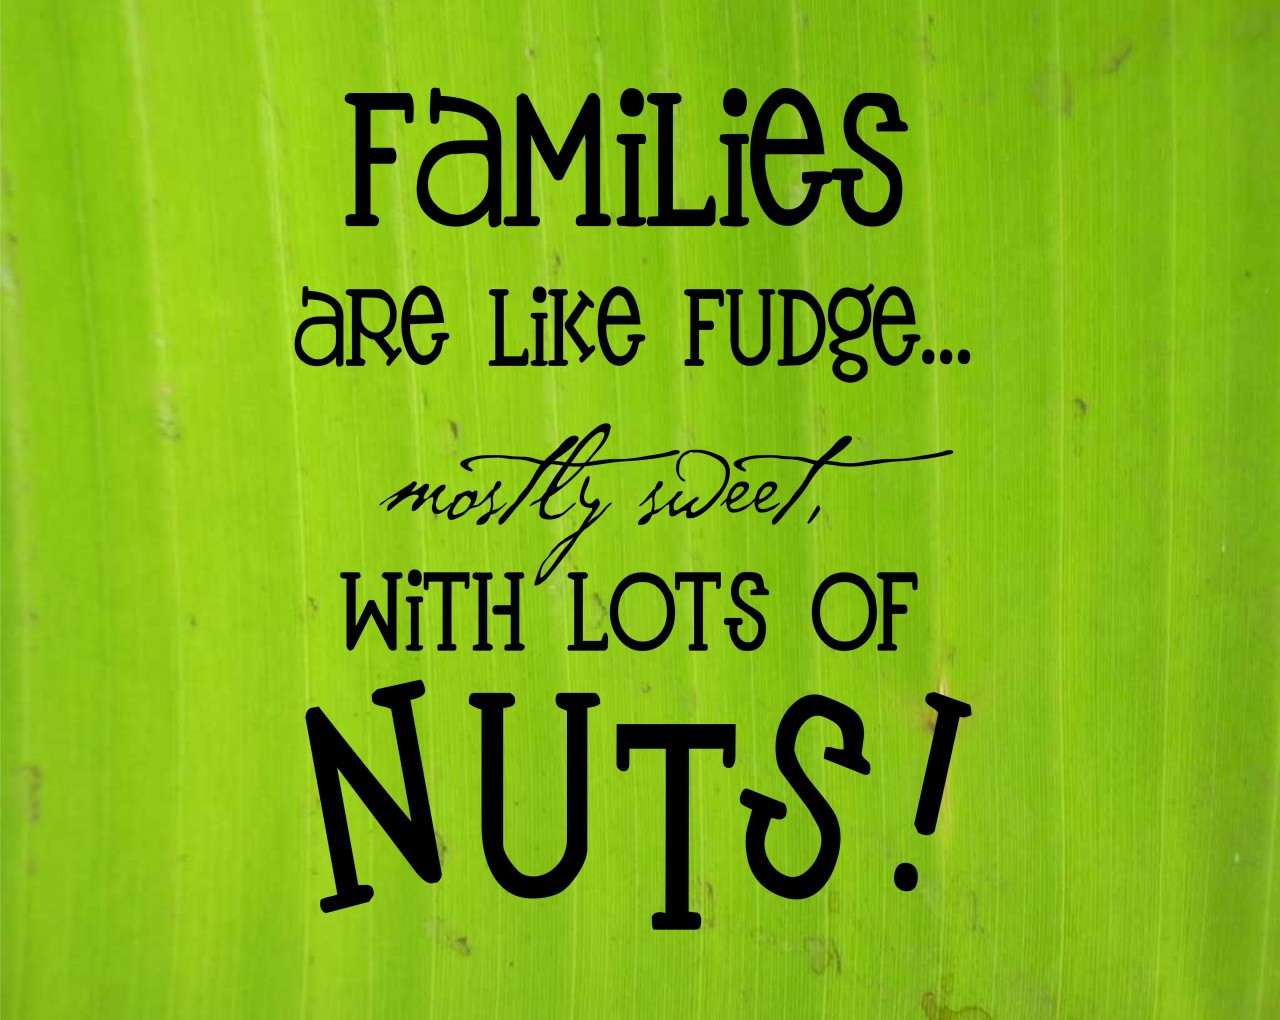 Family Image Quotes
 Crazy Family Quotes QuotesGram